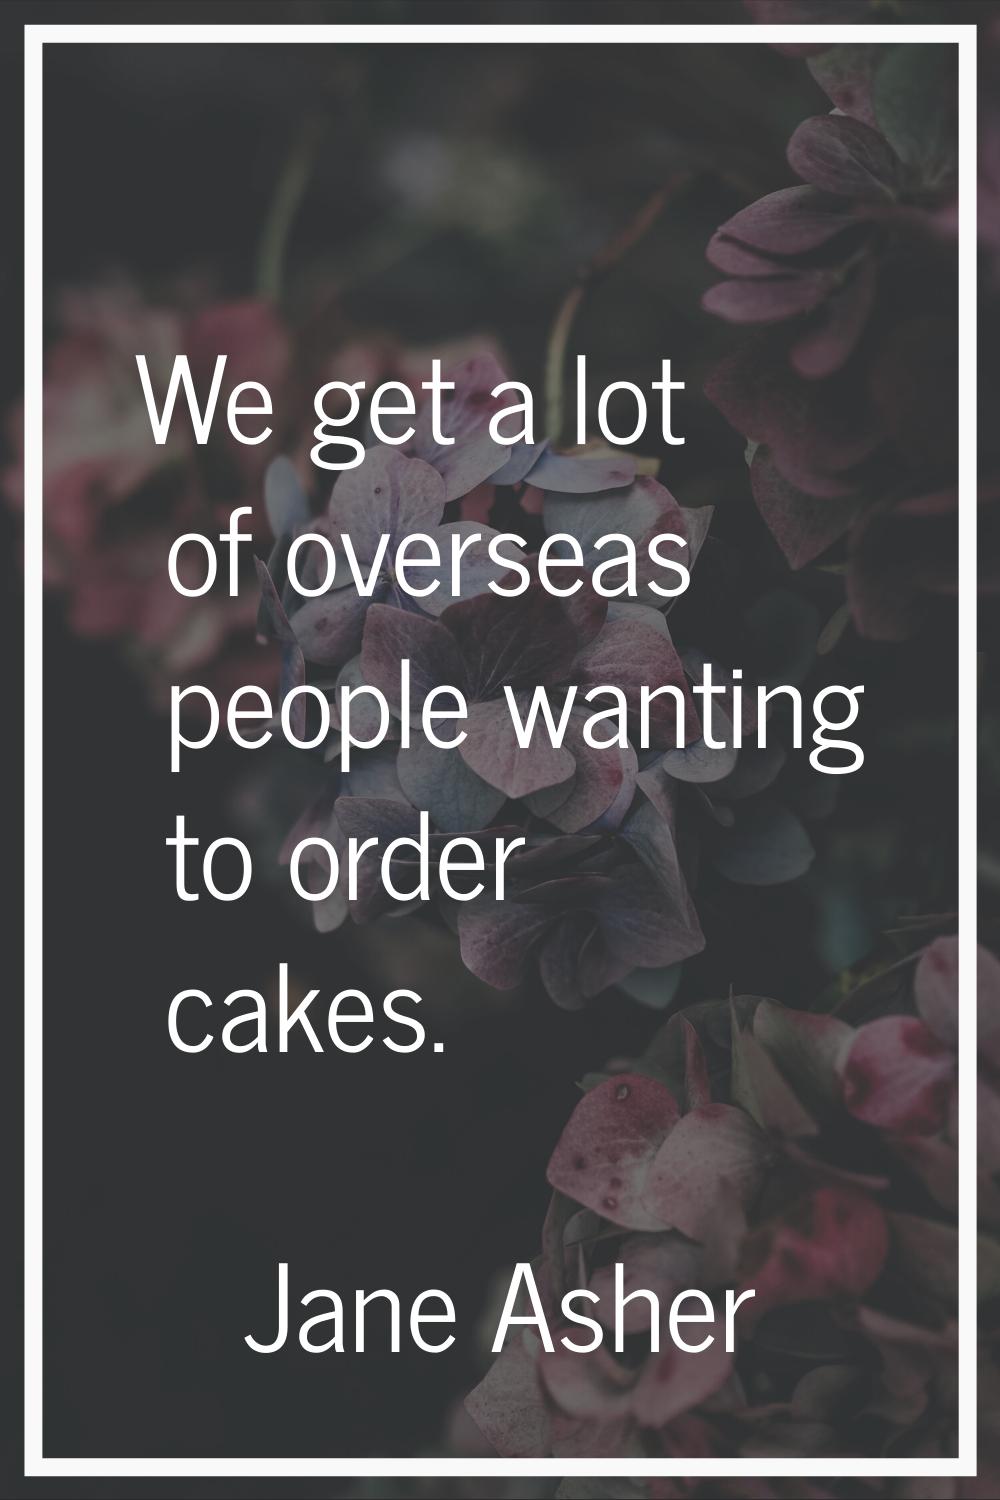 We get a lot of overseas people wanting to order cakes.